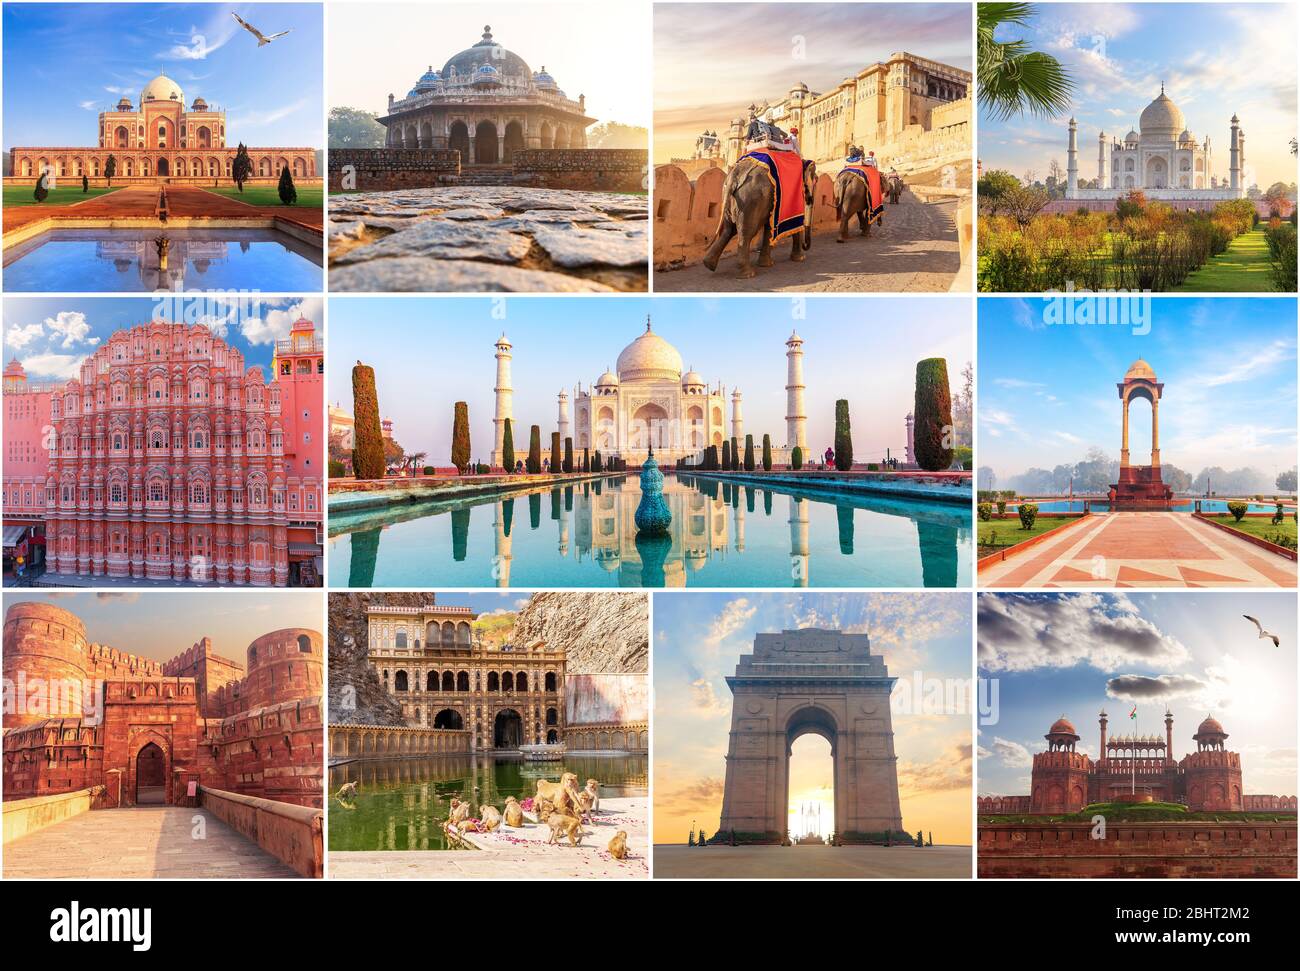 Famous places of India in the collage of photos Stock Photo